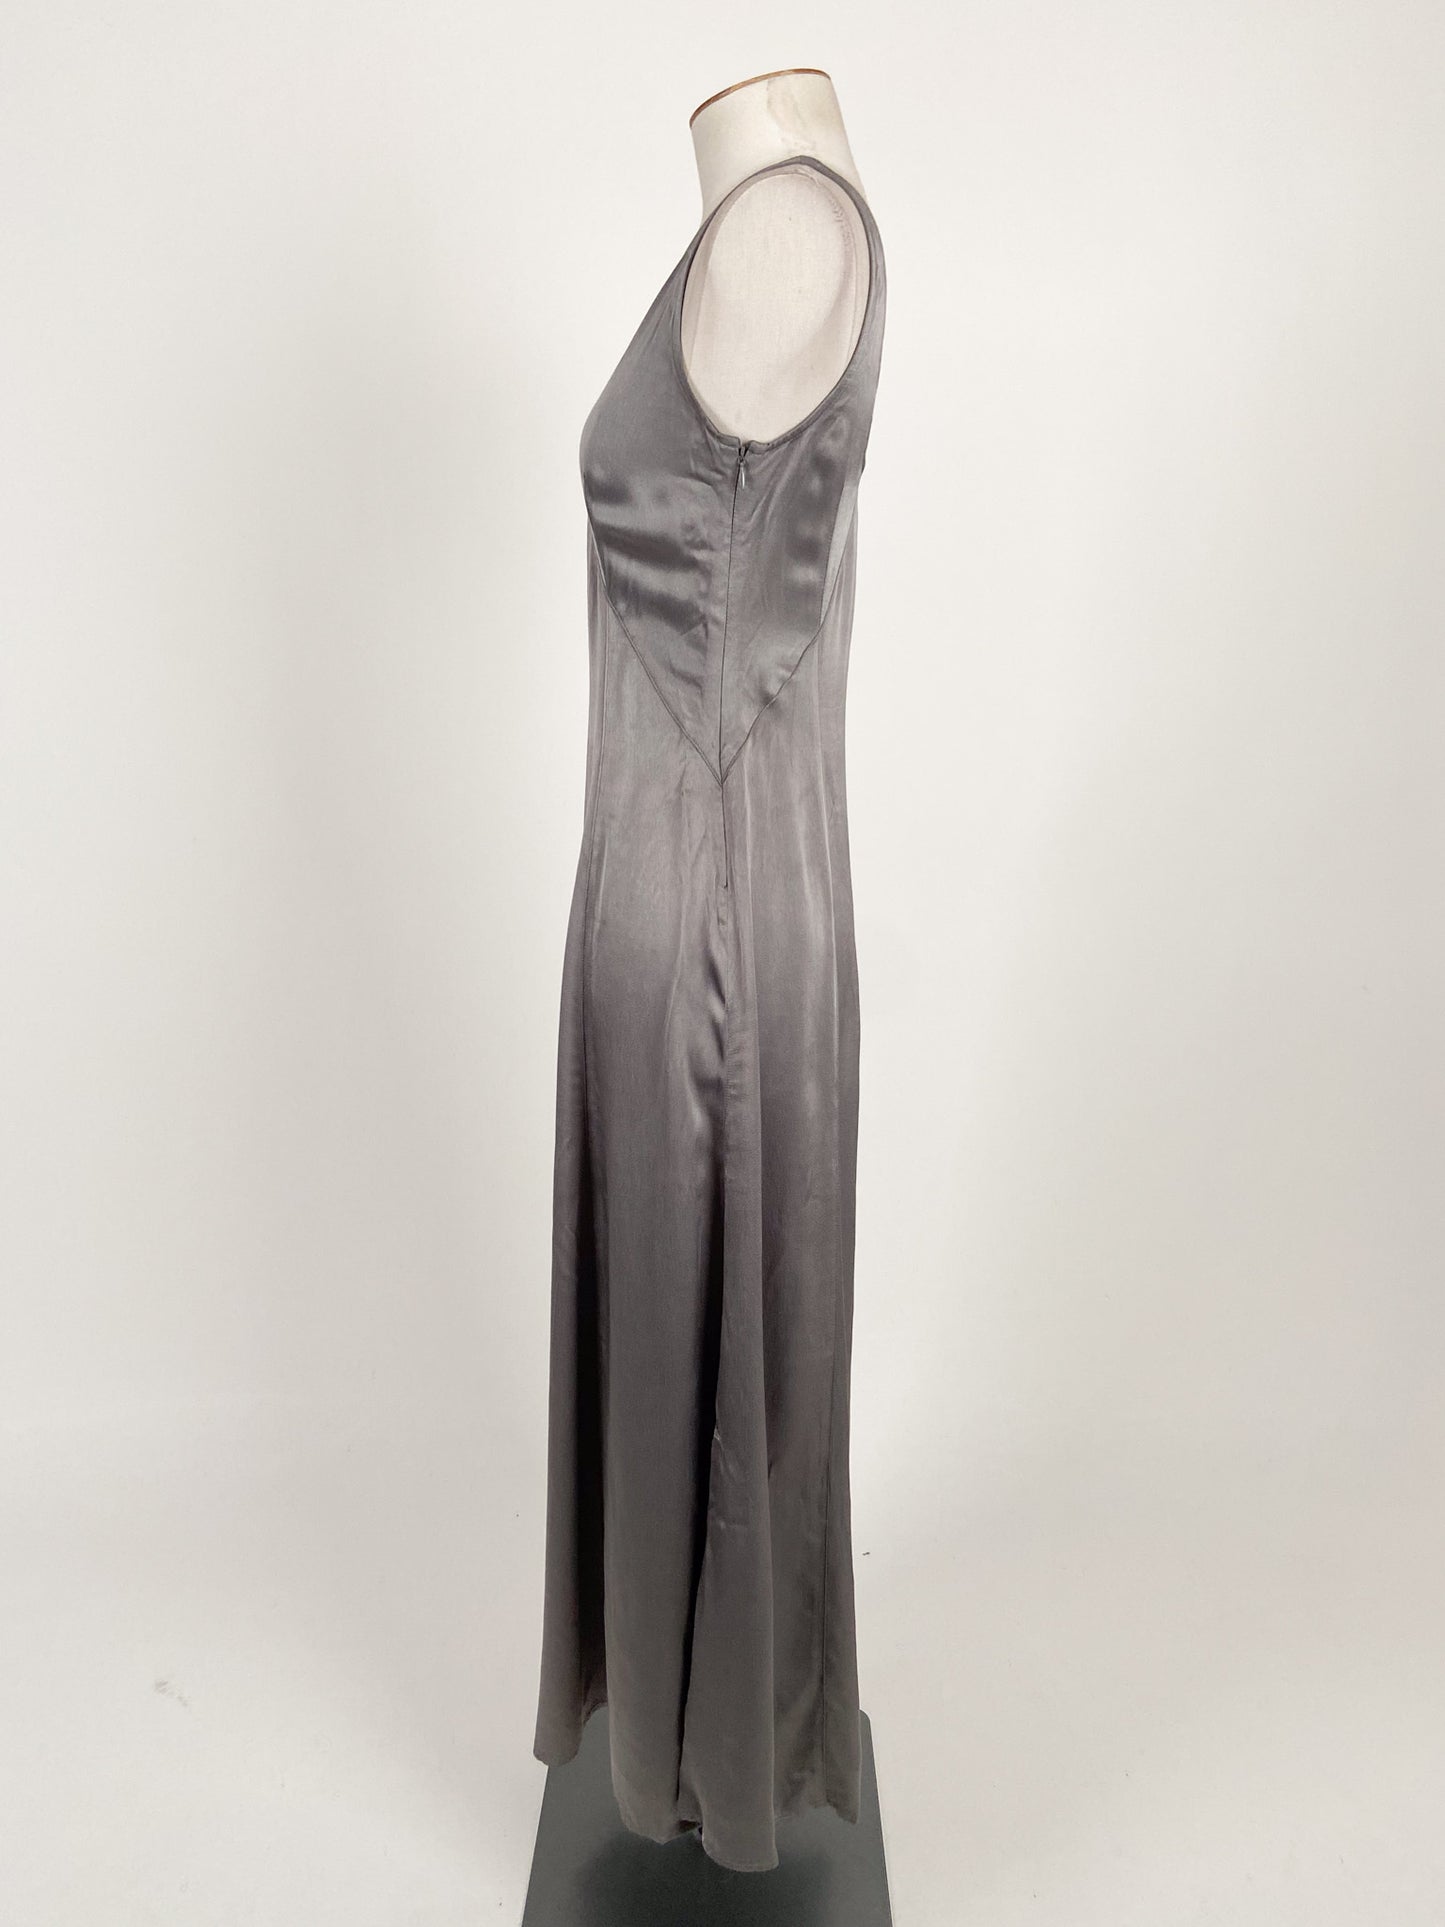 Max | Grey Cocktail/Formal Dress | Size 6